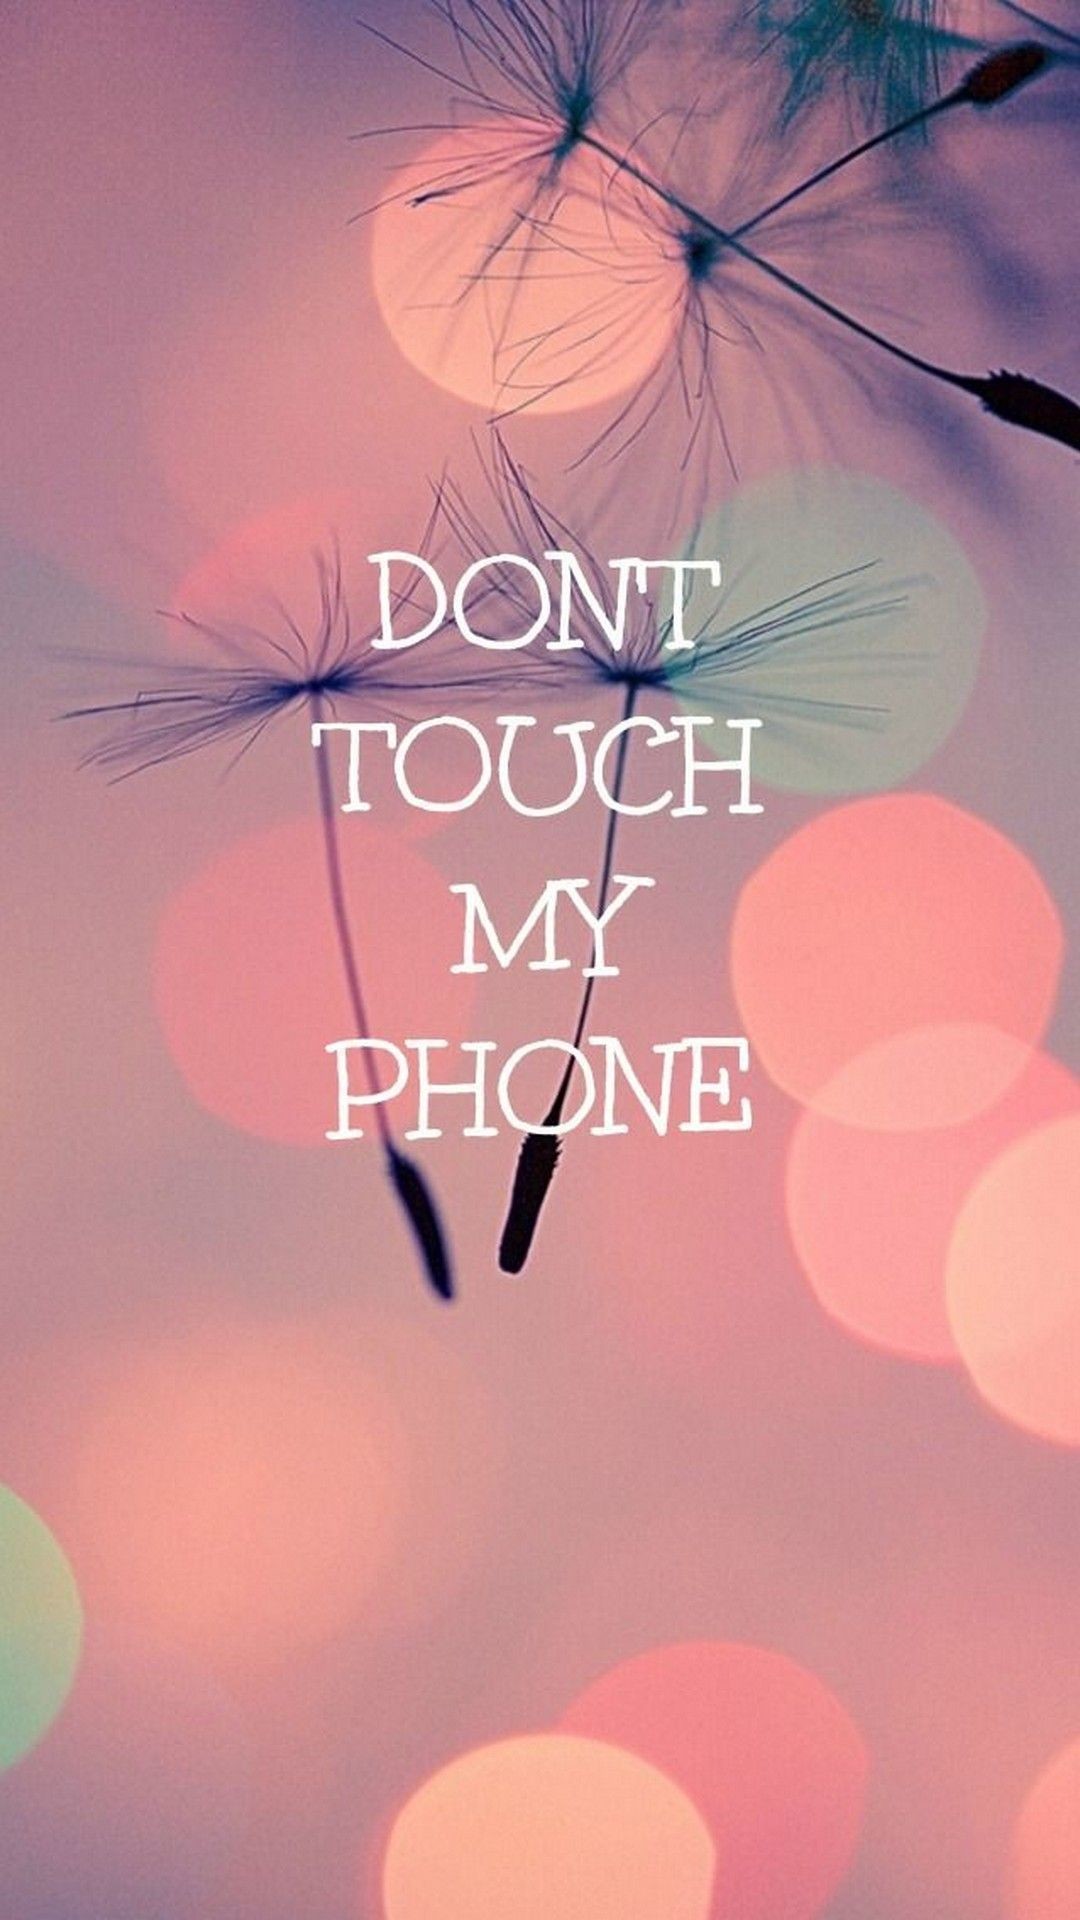 1080x1920 Cute Girly Wallpaper Dont Touch My Phone | Best HD Wallpapers